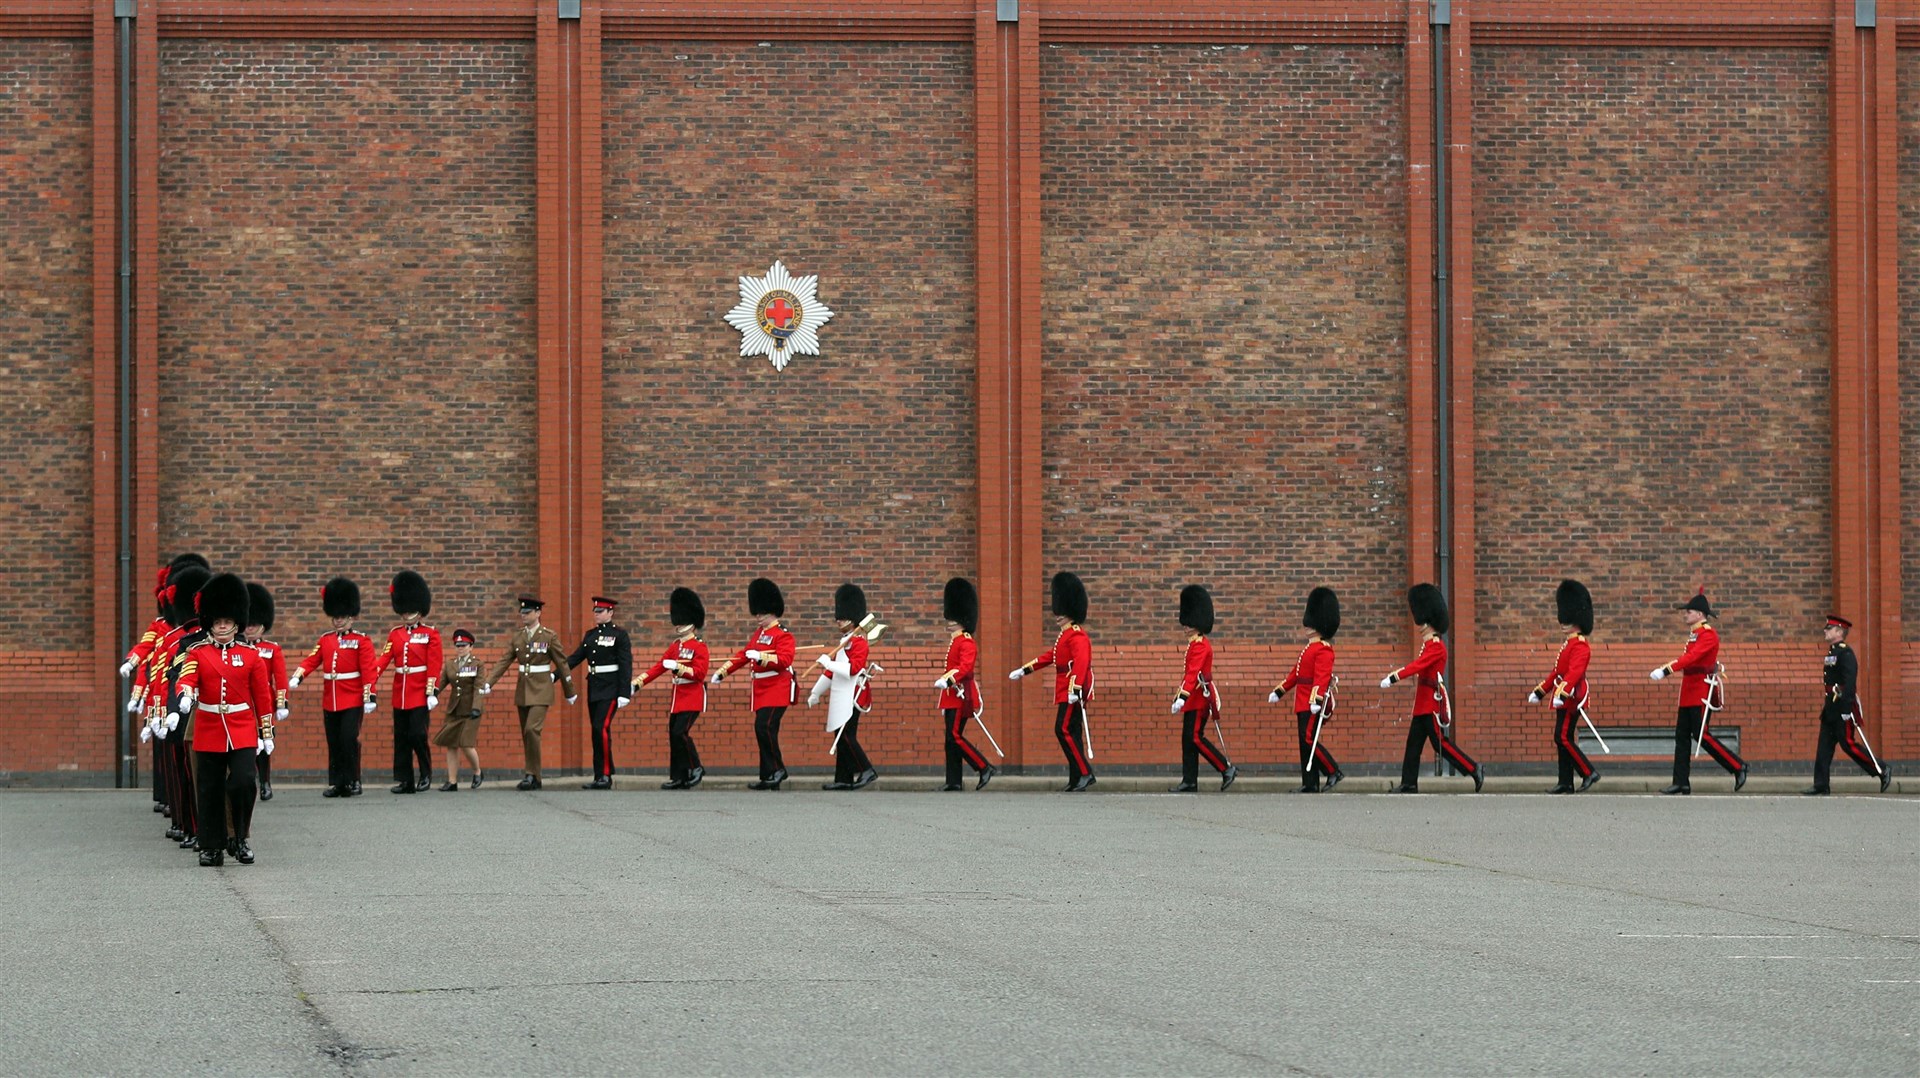 Soldiers from the 1st Battalion Coldstream Guards at Victoria Barracks in Windsor as they prepare for Trooping the Colour (Steve Parsons/PA)